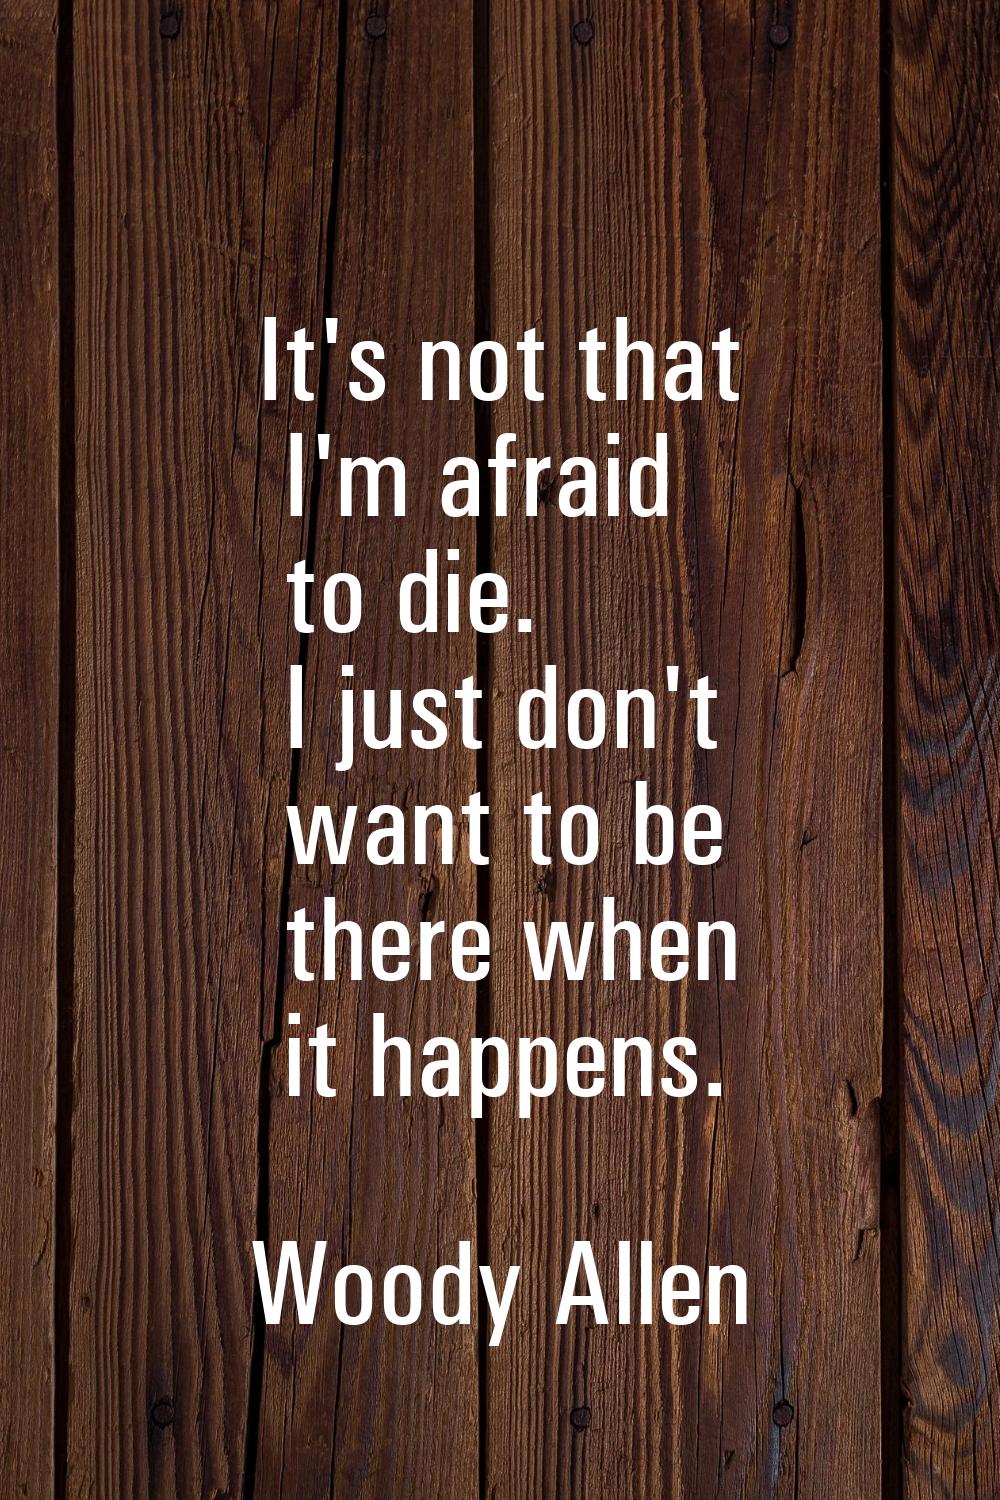 It's not that I'm afraid to die. I just don't want to be there when it happens.